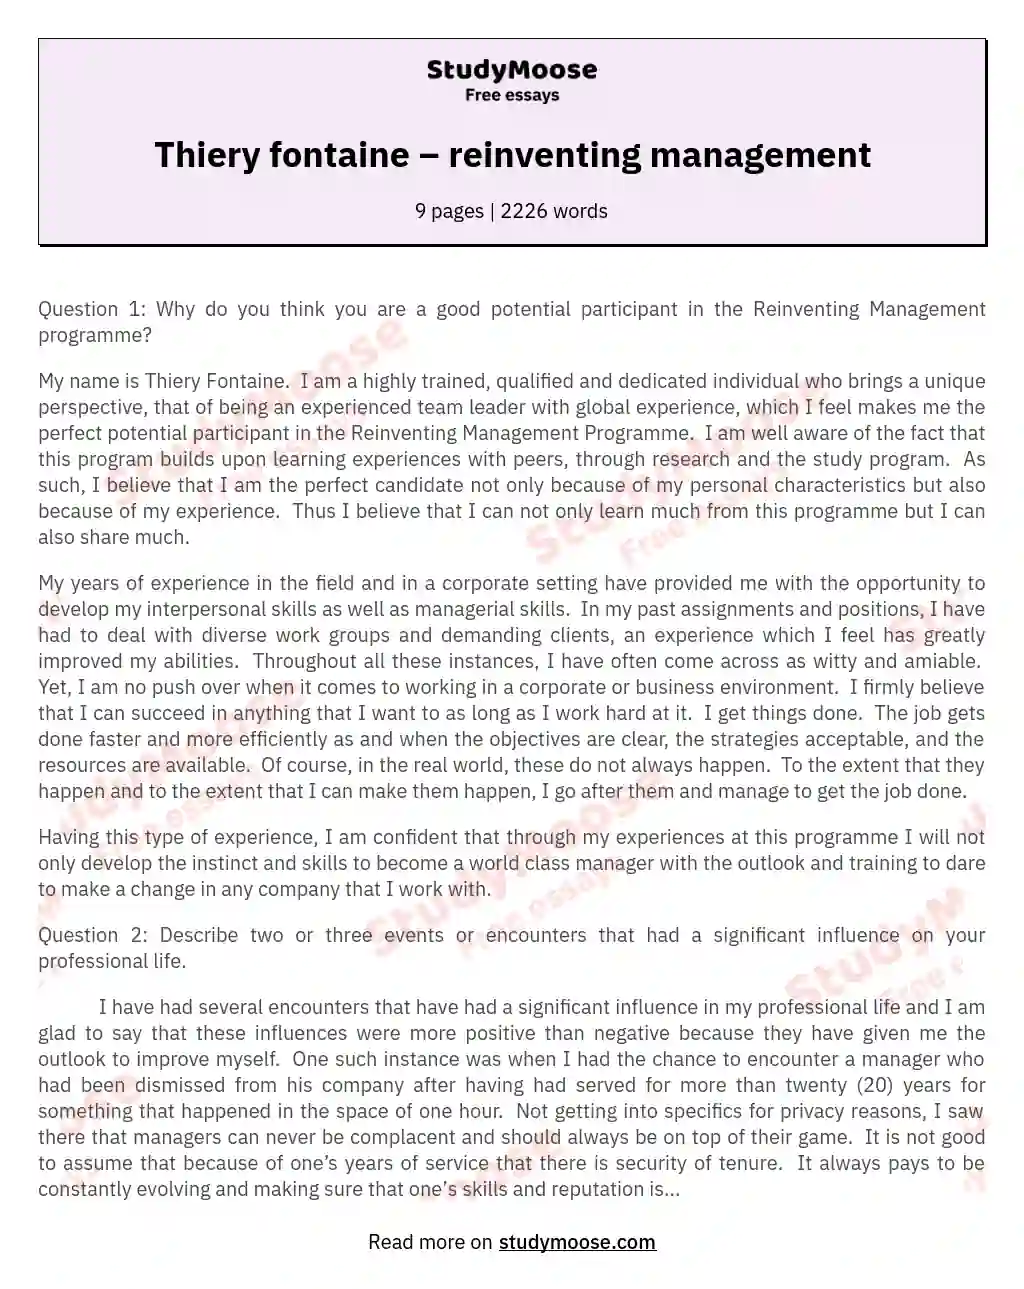 Thiery fontaine – reinventing management